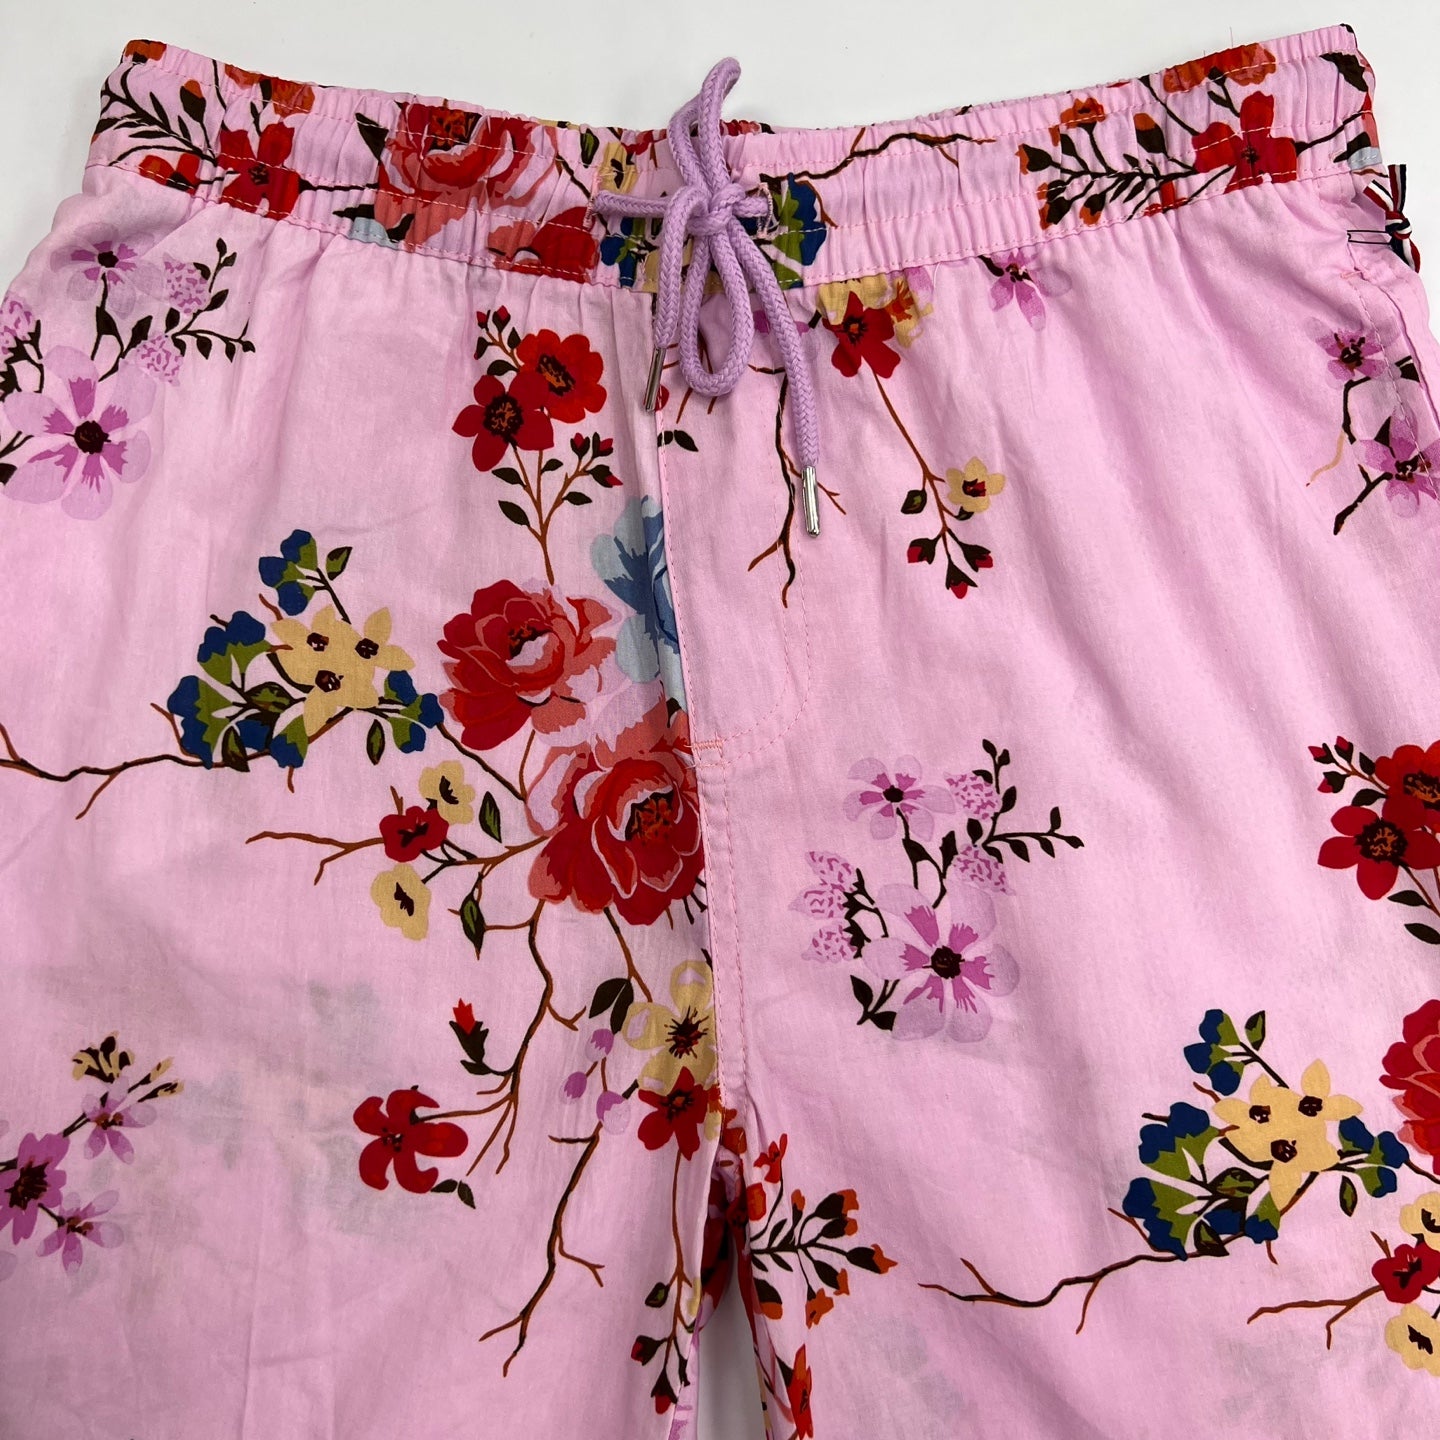 SWTICH Floral Graphic Print Shorts - Pink